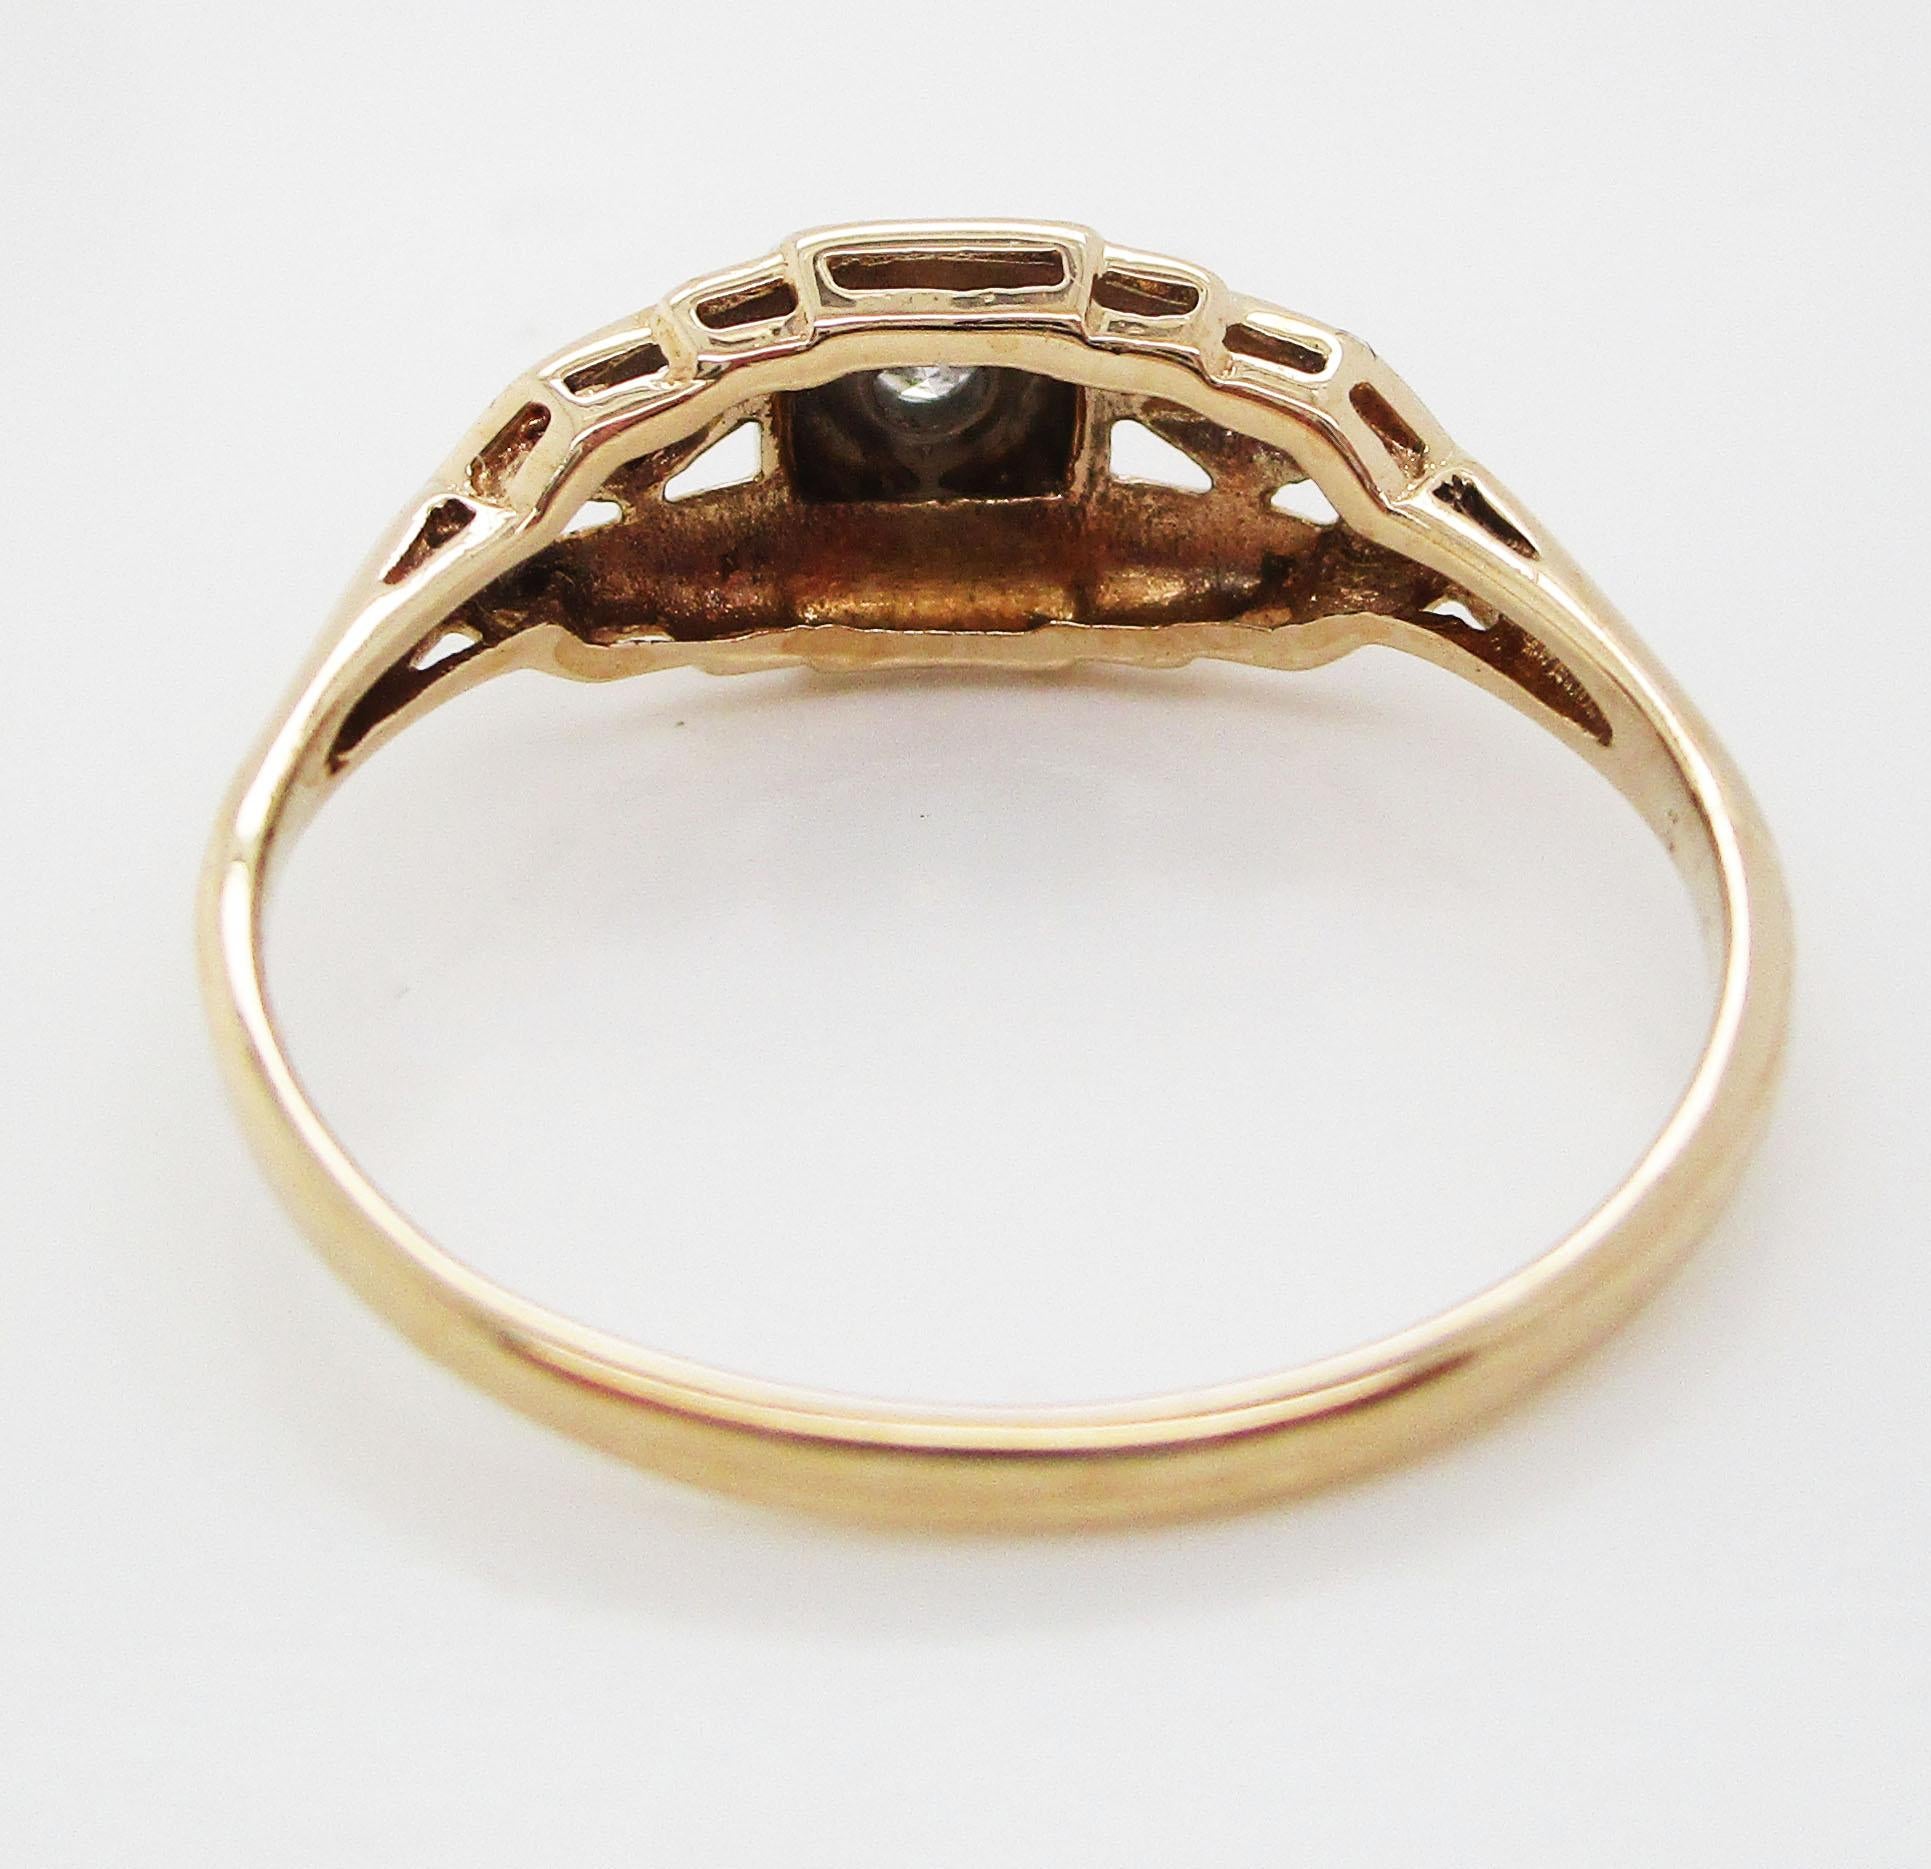 Vintage Mid-Century 14 Karat White and Yellow Gold Diamond Engagement Ring For Sale 1